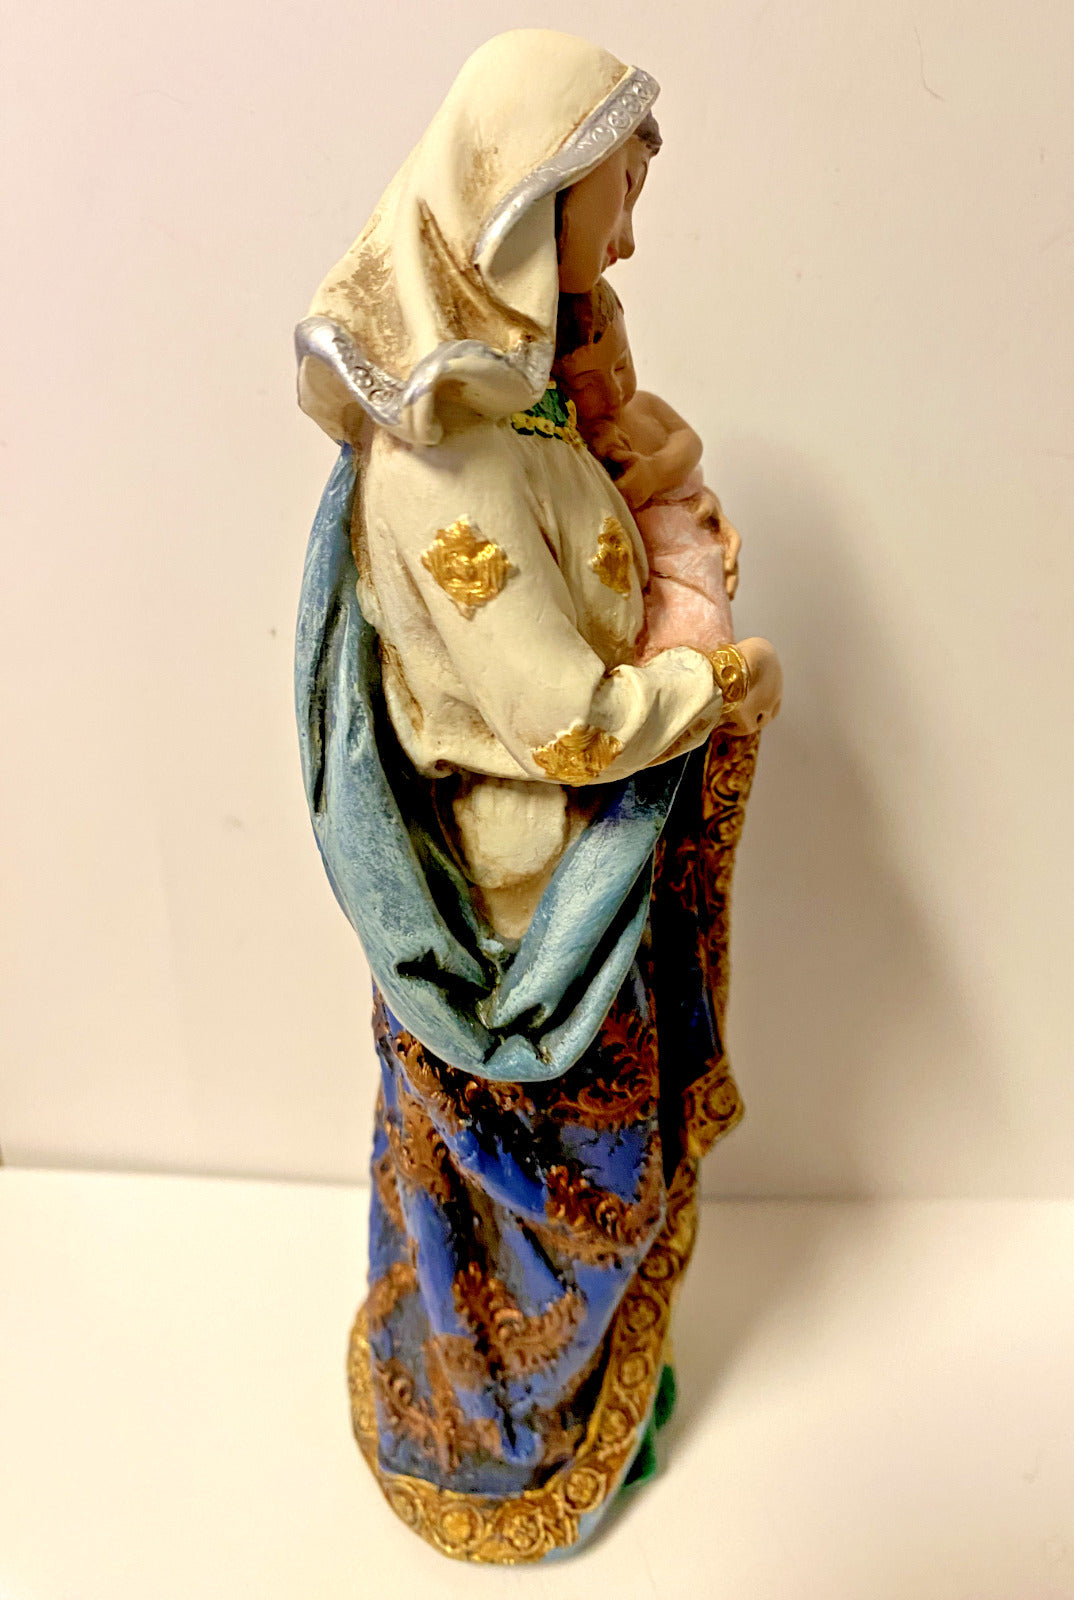 Adoring Blessed Mother & Child Jesus Statue 7 1/8" Statue, New - Bob and Penny Lord